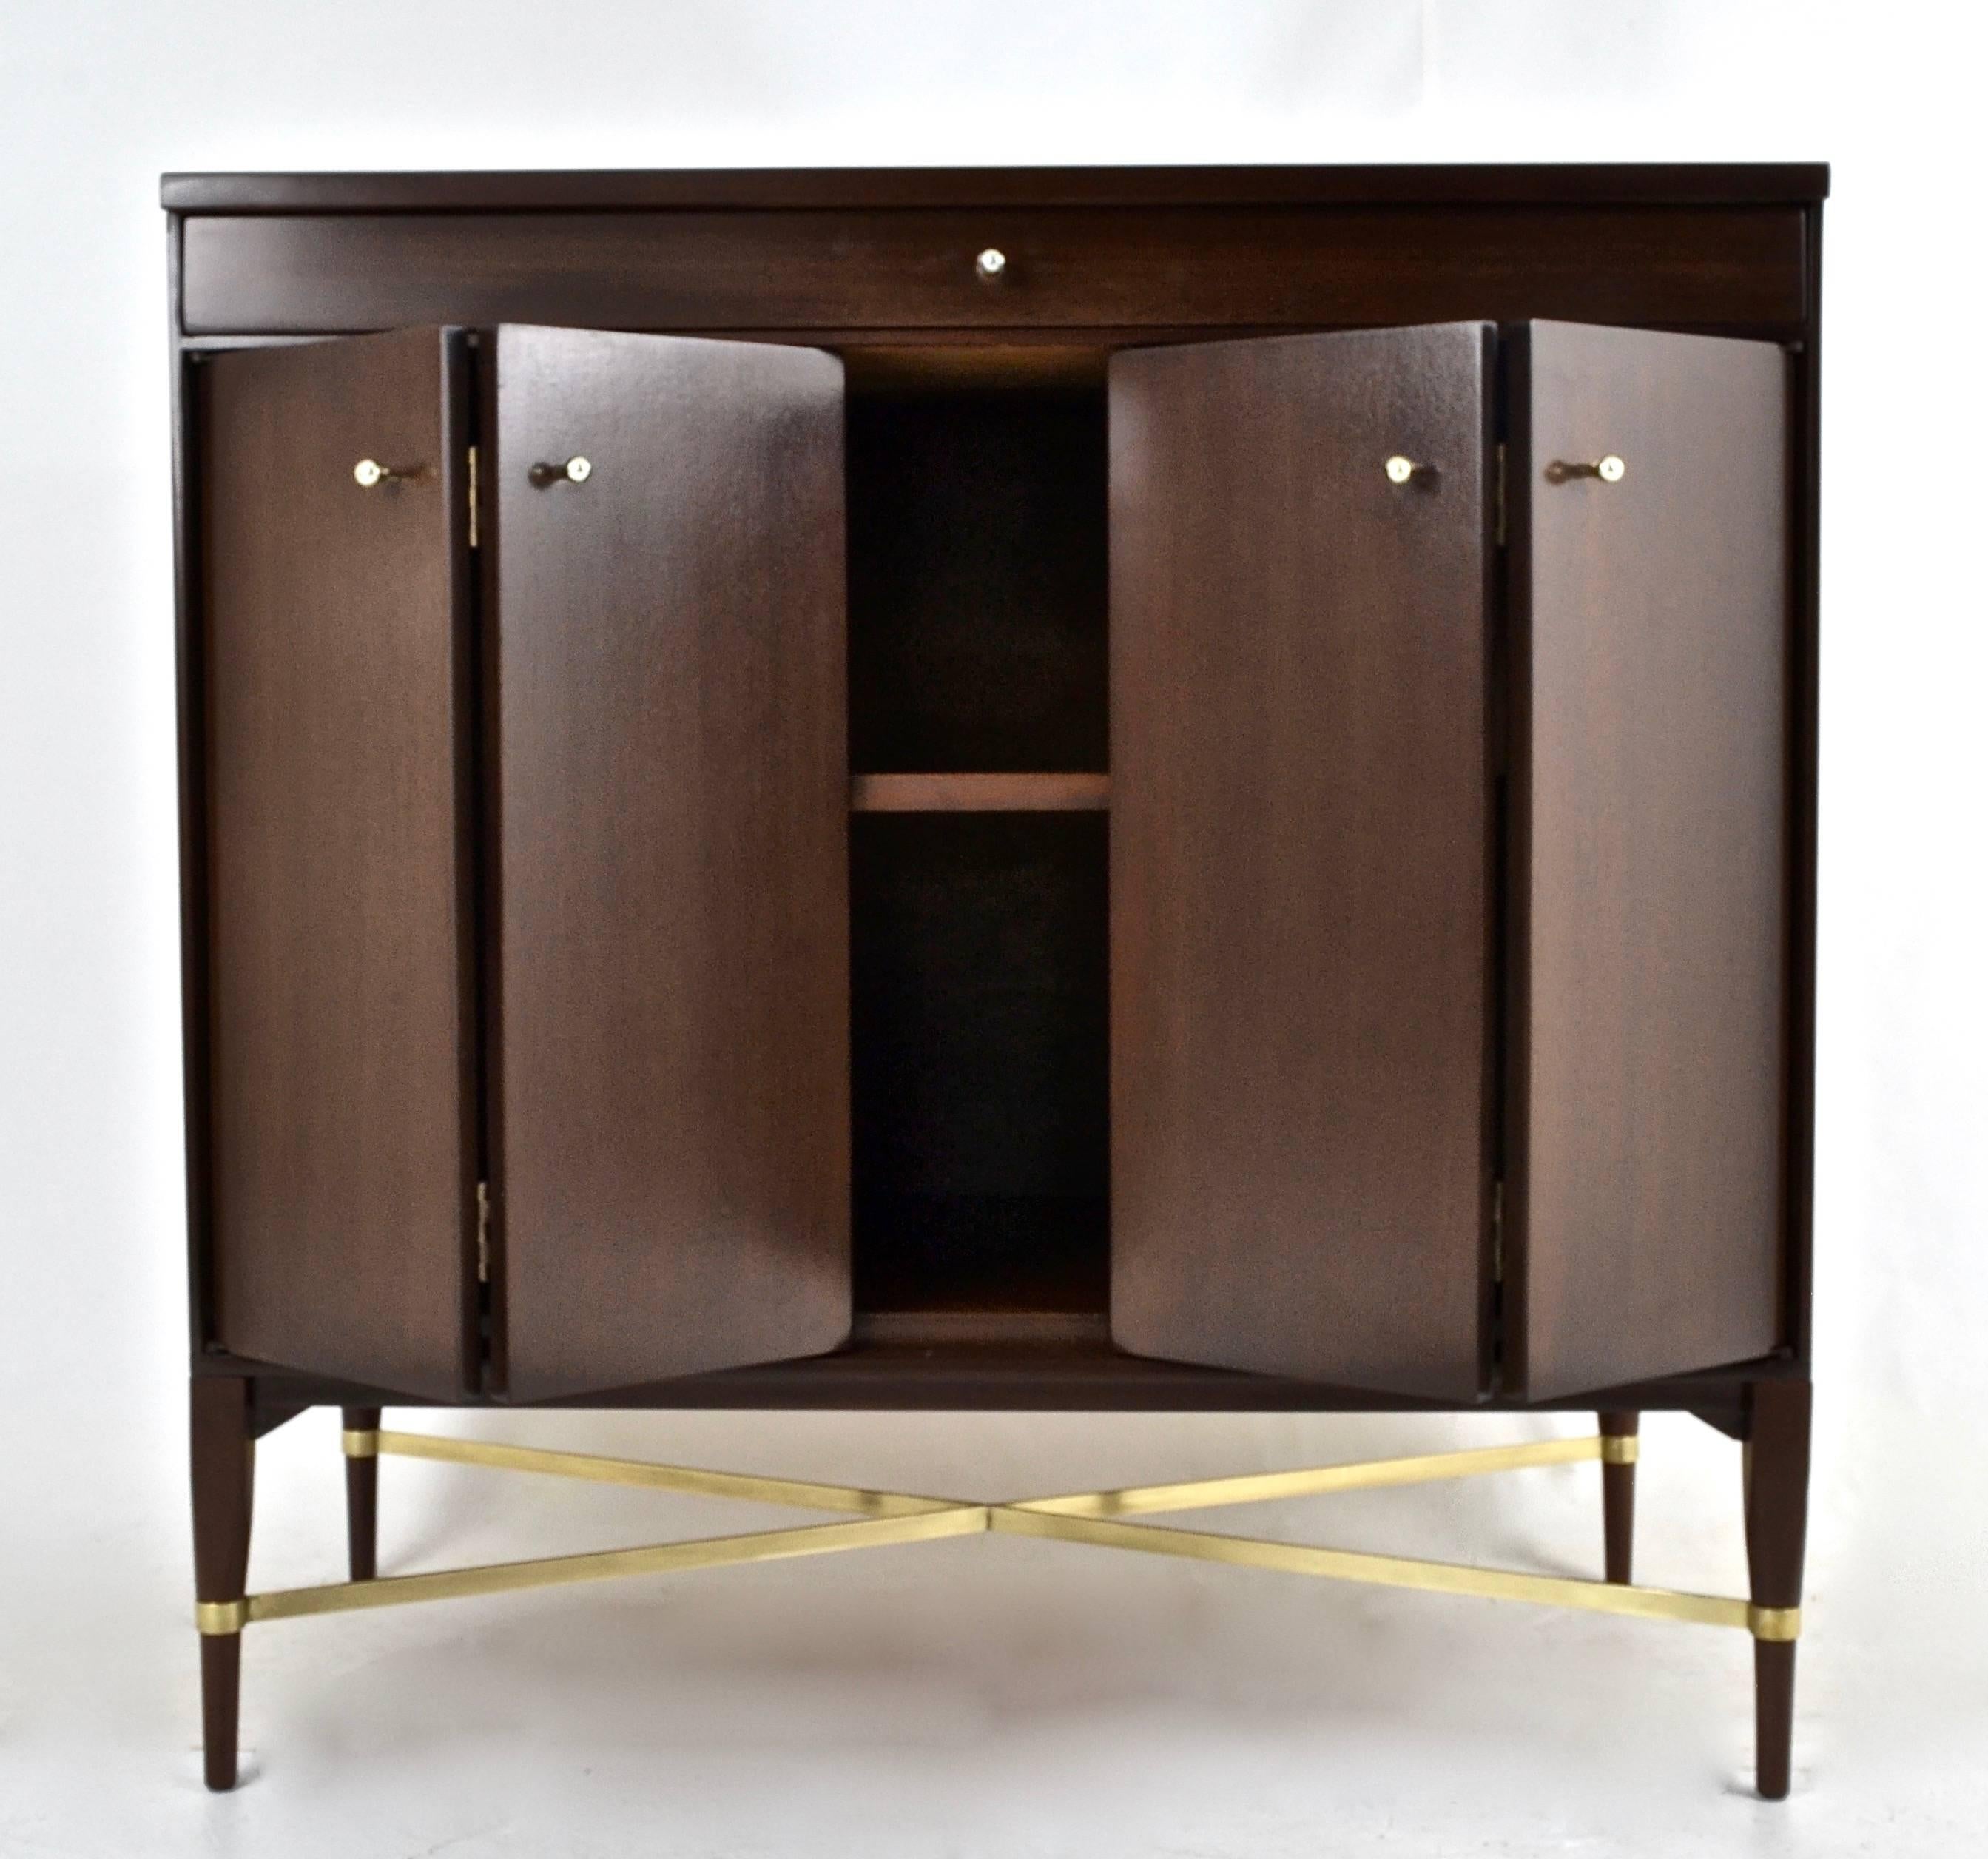 Featuring signature brass cross stretcher, this unusual McCobb cabinet has been fully restored. Single long drawer over a pair of bi-fold doors. Original pulls. Brass stretcher has been polished and lacquered.